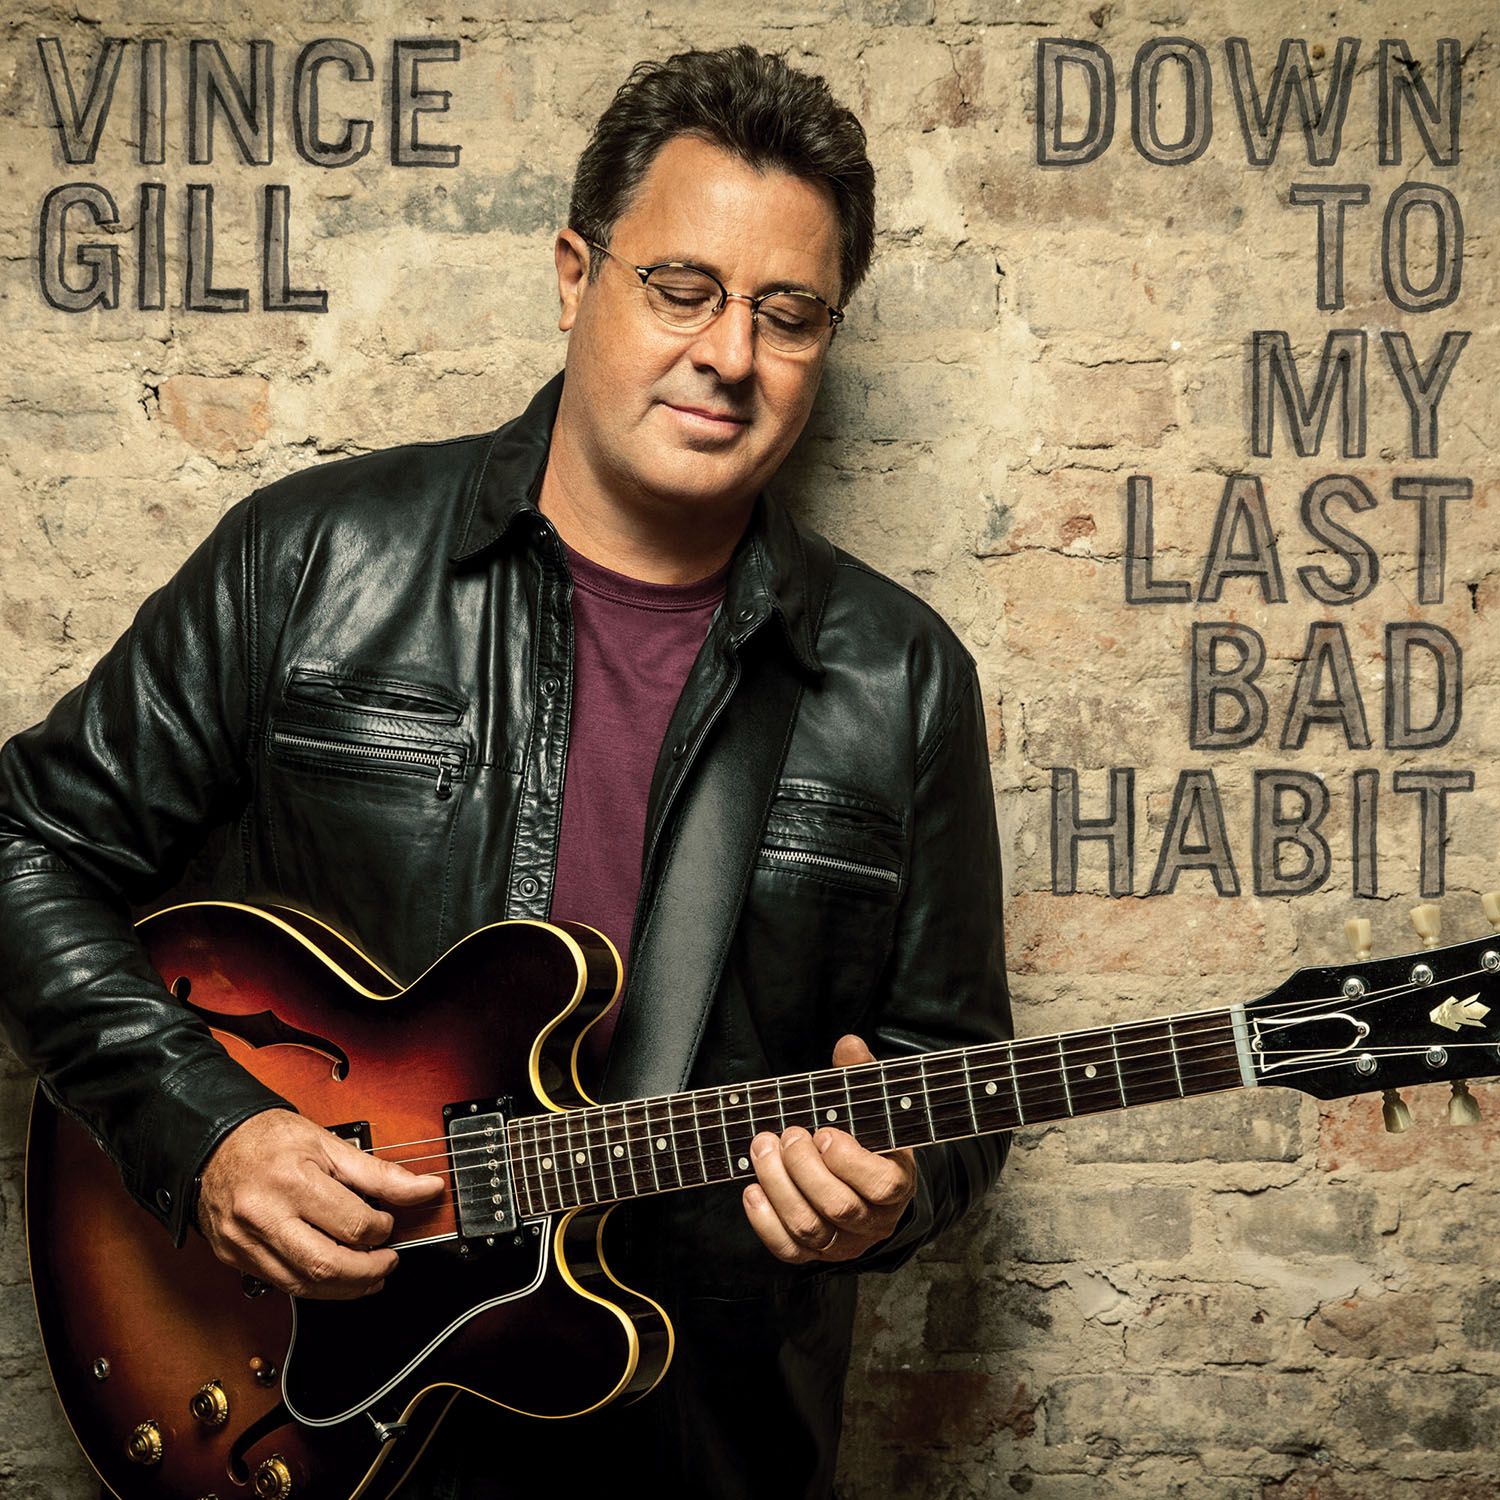 Vince Gill Prepares for Down To My Last Bad Habit Available Friday Feb. 12